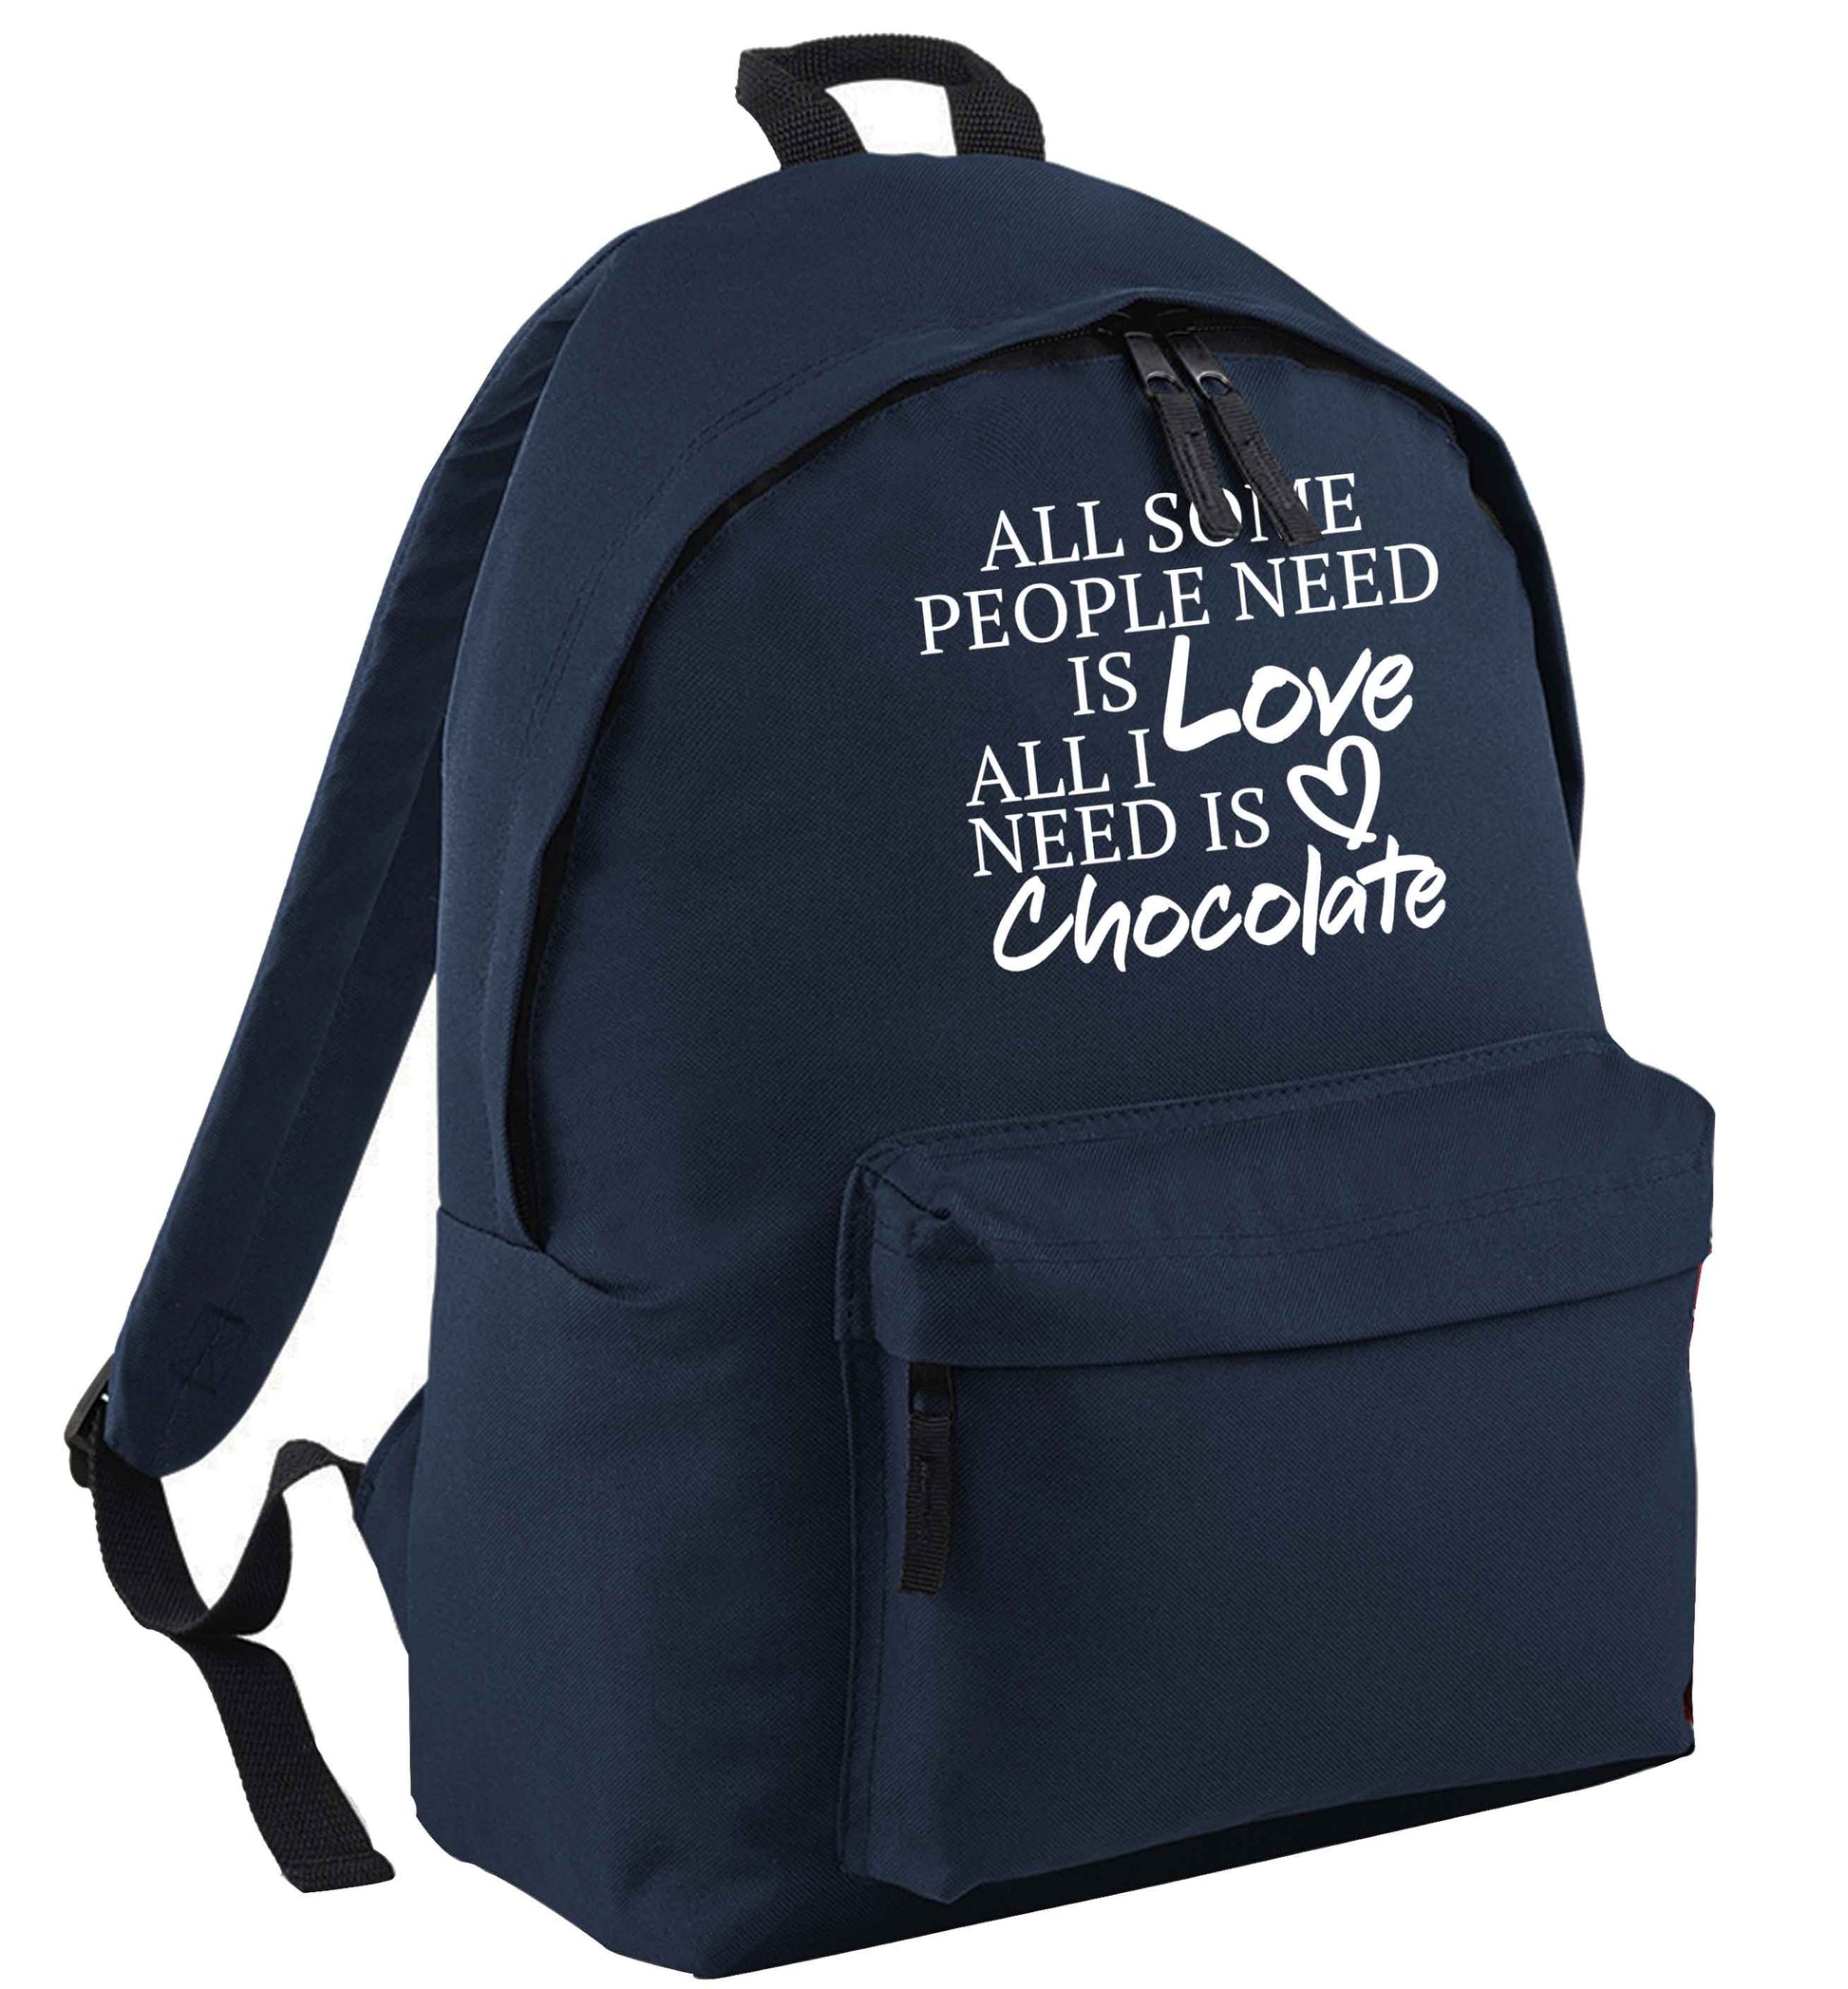 All some people need is love all I need is chocolate | Children's backpack